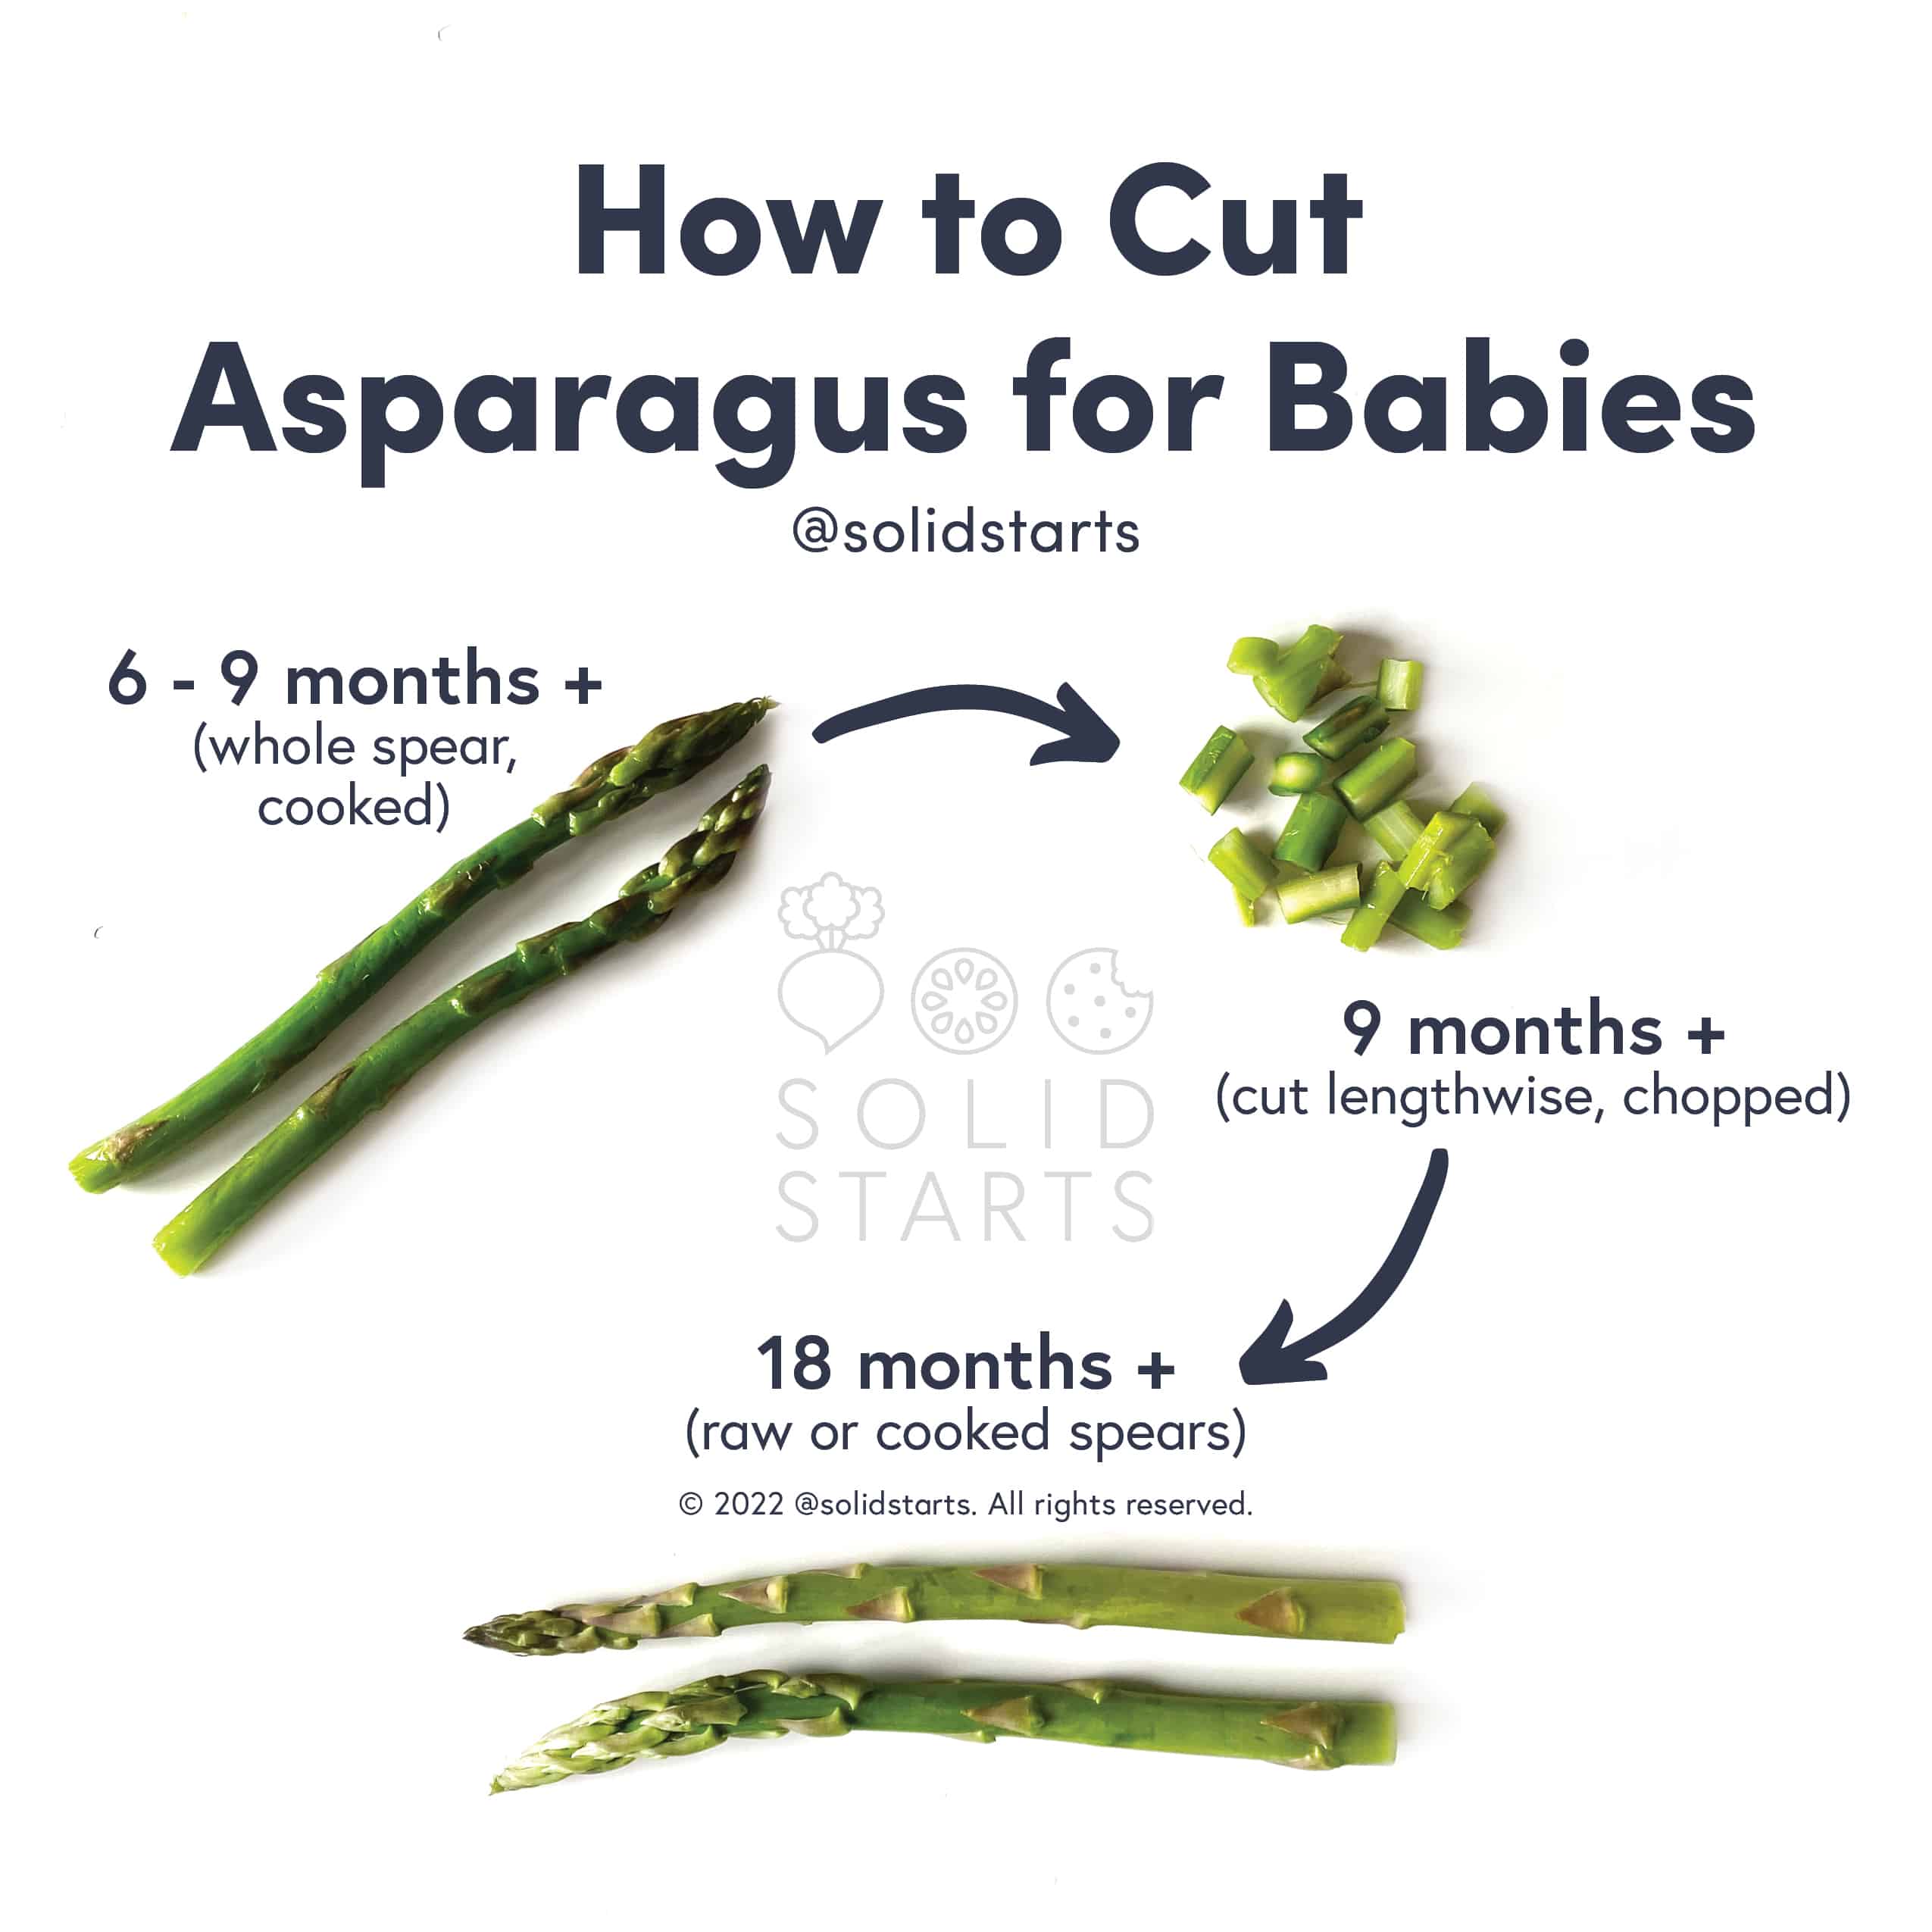 How to Cut Asparagus for Babies